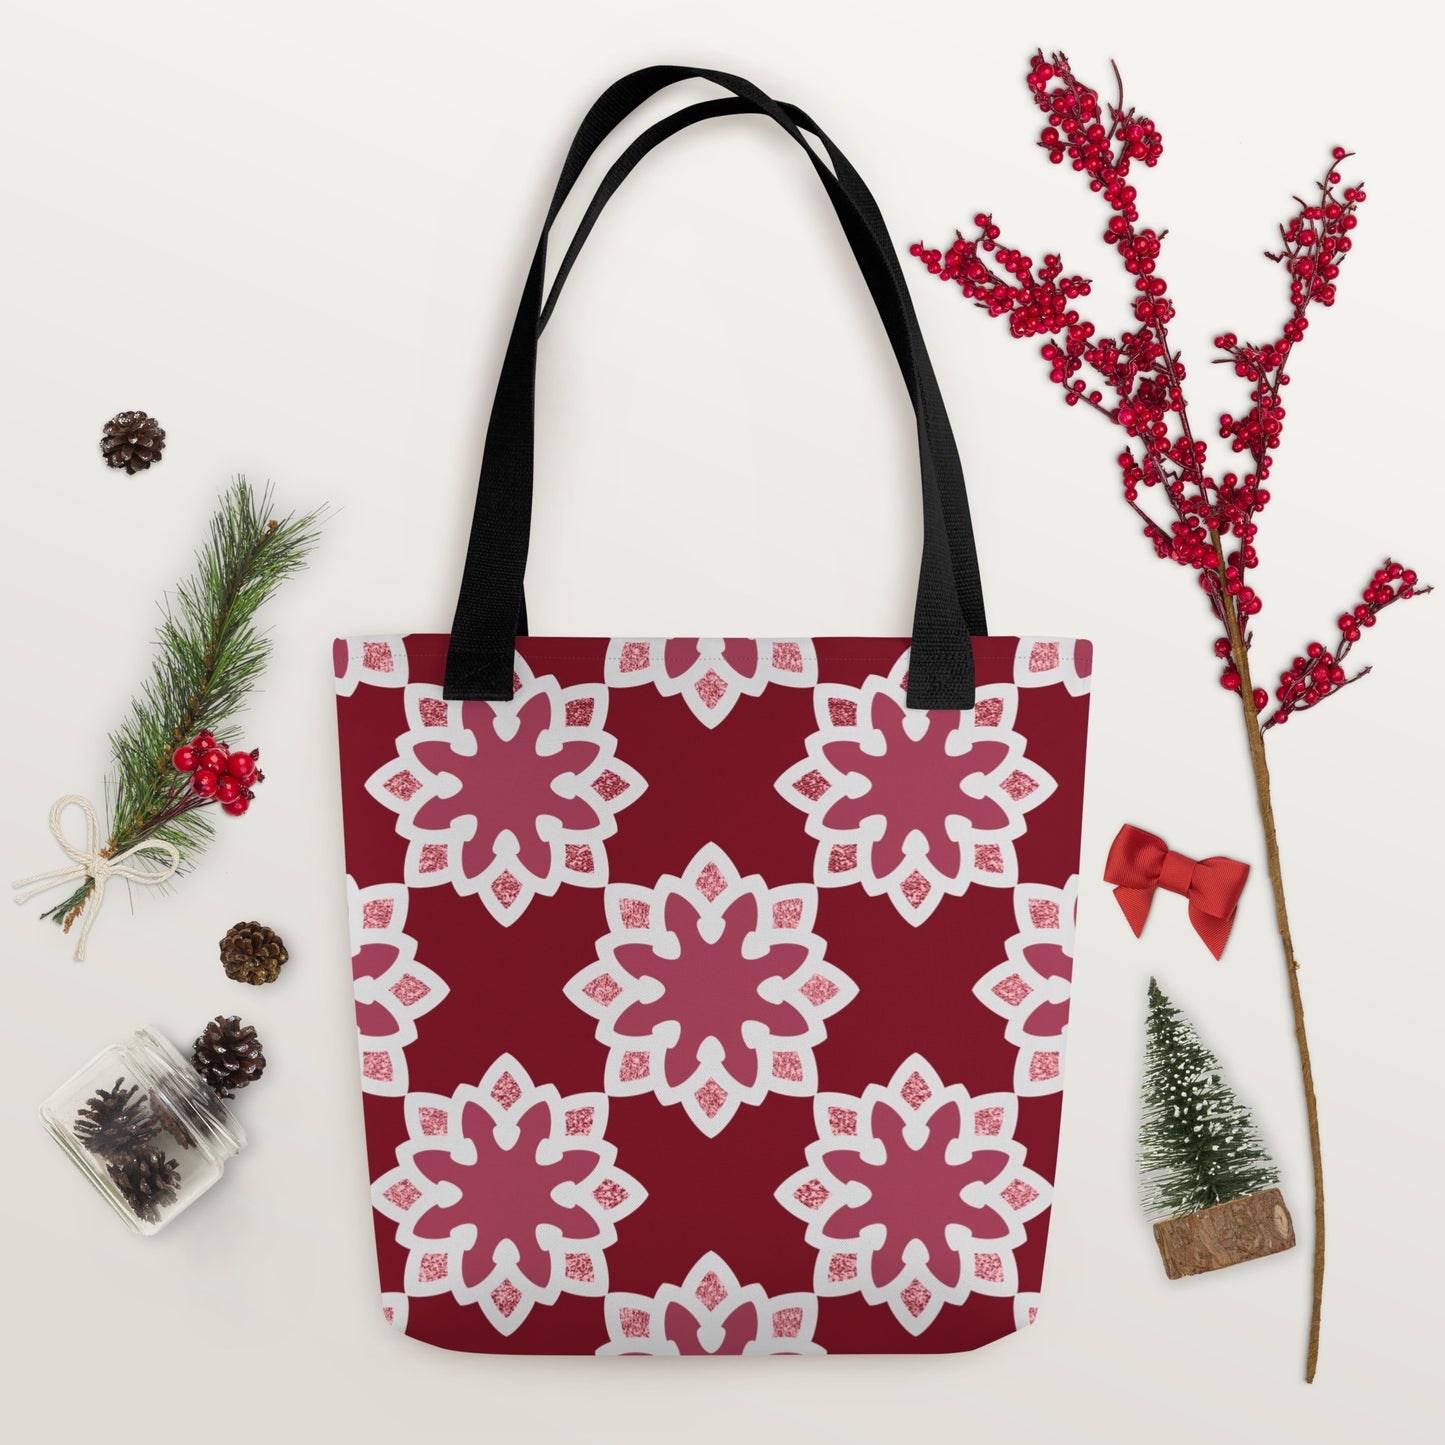 Tote bag - Arabesque Flower in Rouge